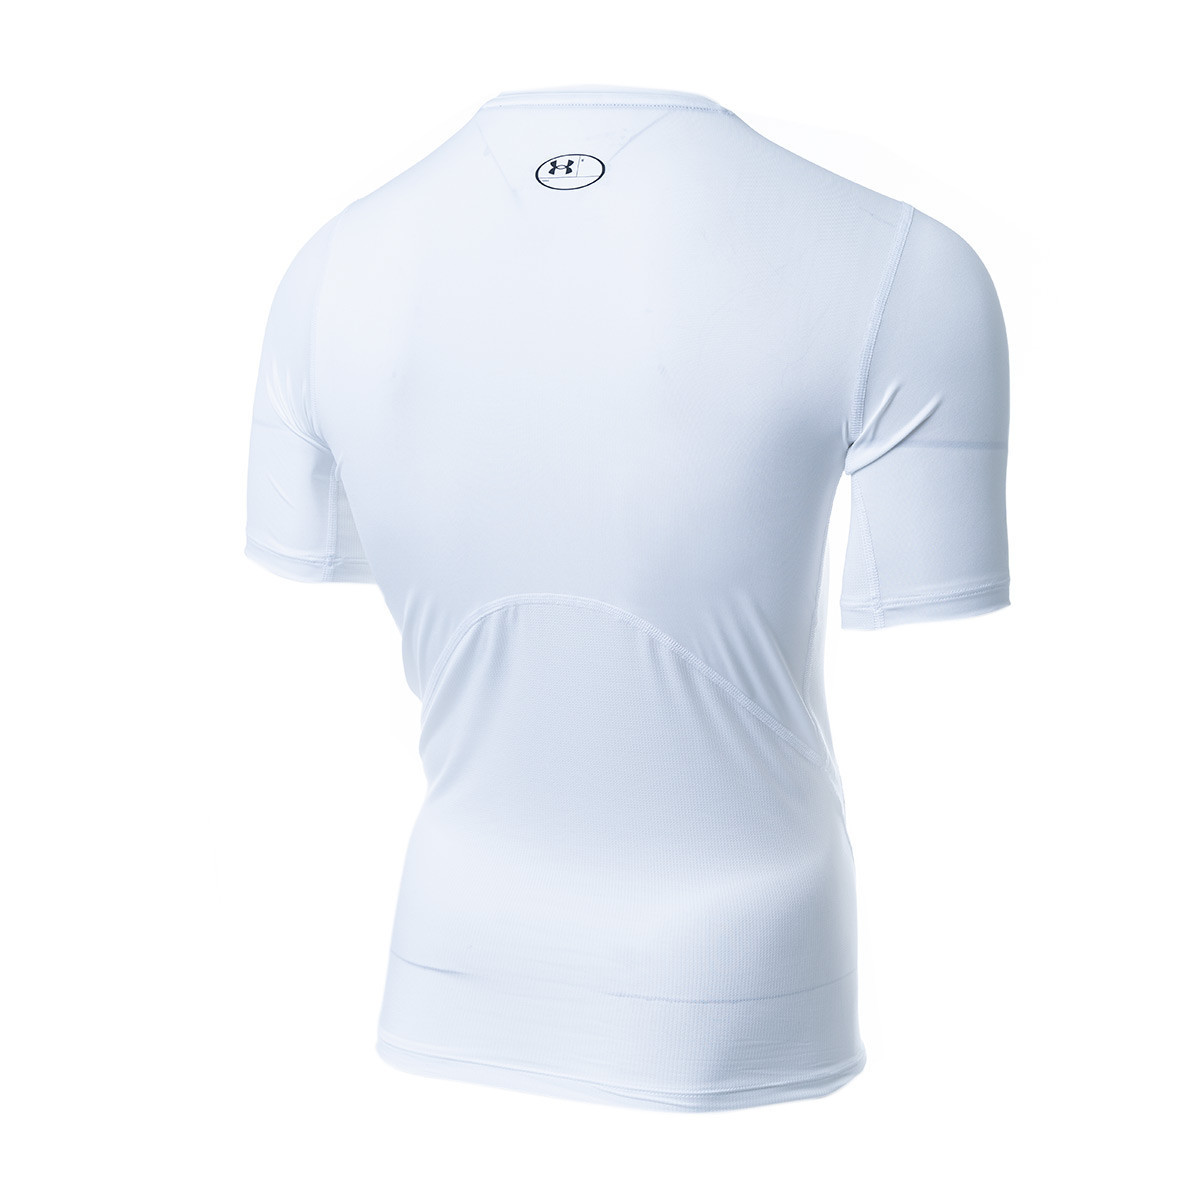 REMERA COMPRESION HG COMP UNDER ARMOUR